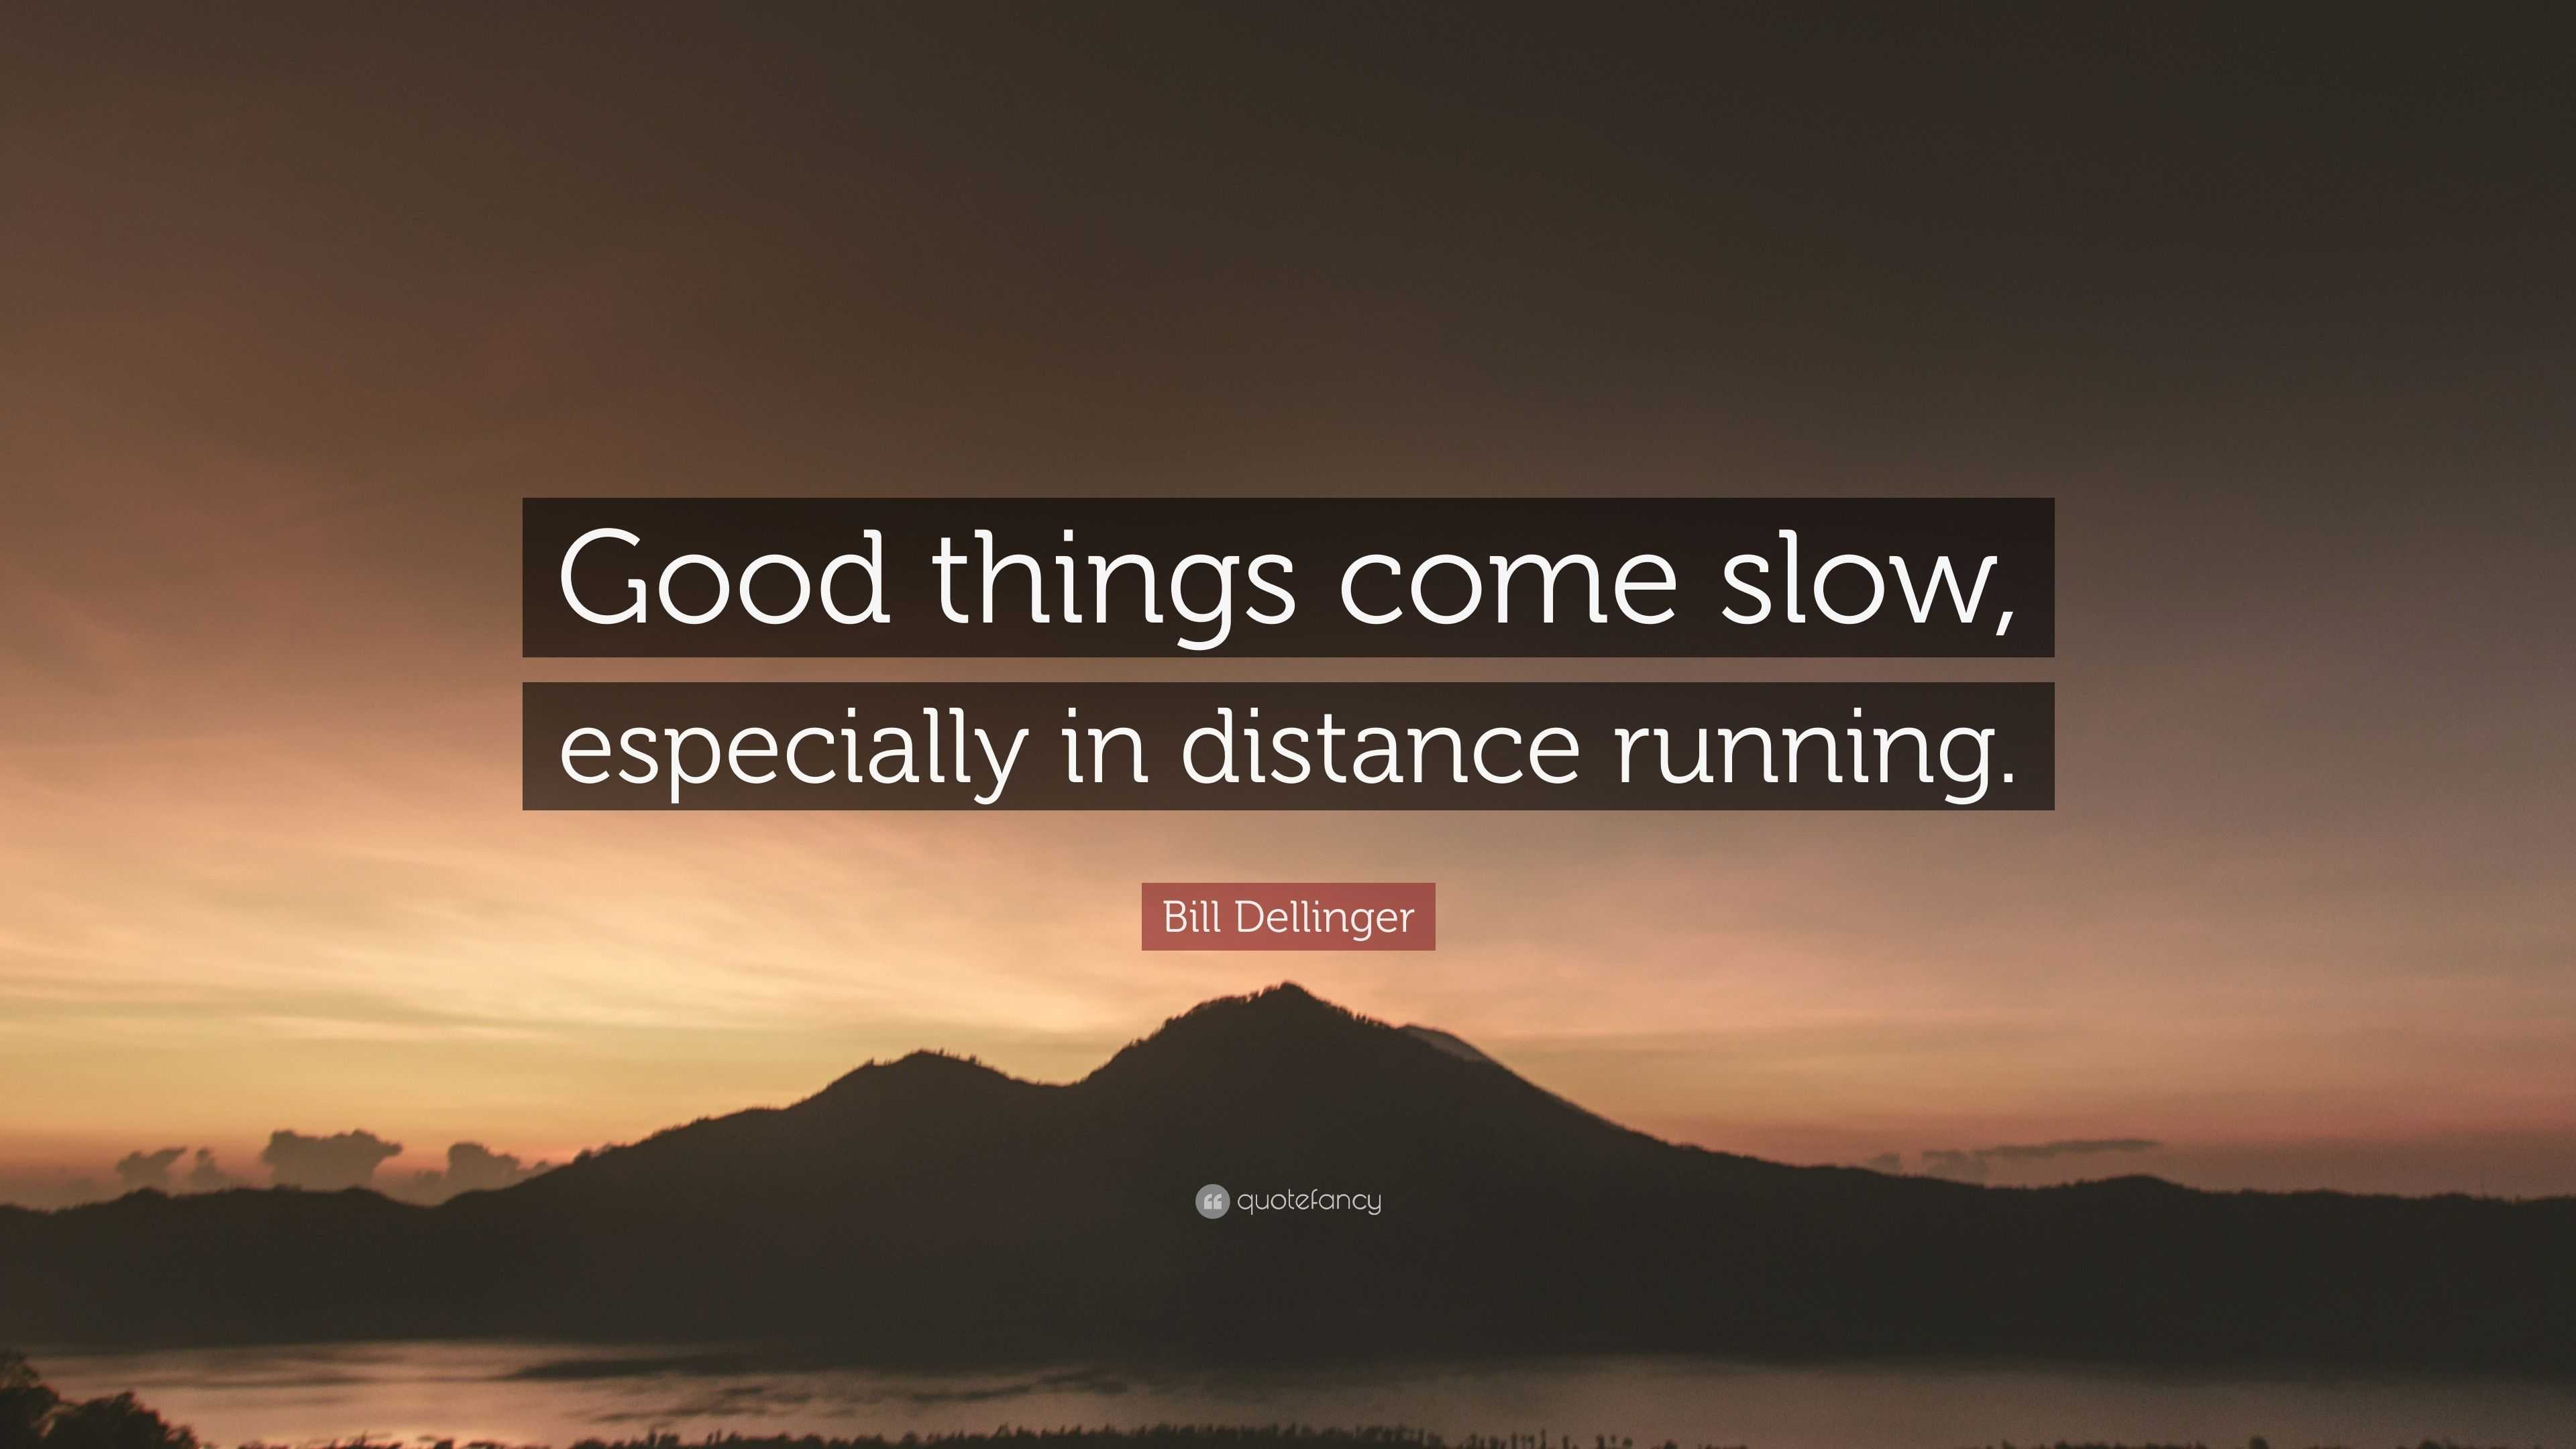 3305787-Bill-Dellinger-Quote-Good-things-come-slow-especially-in-distance.jpg